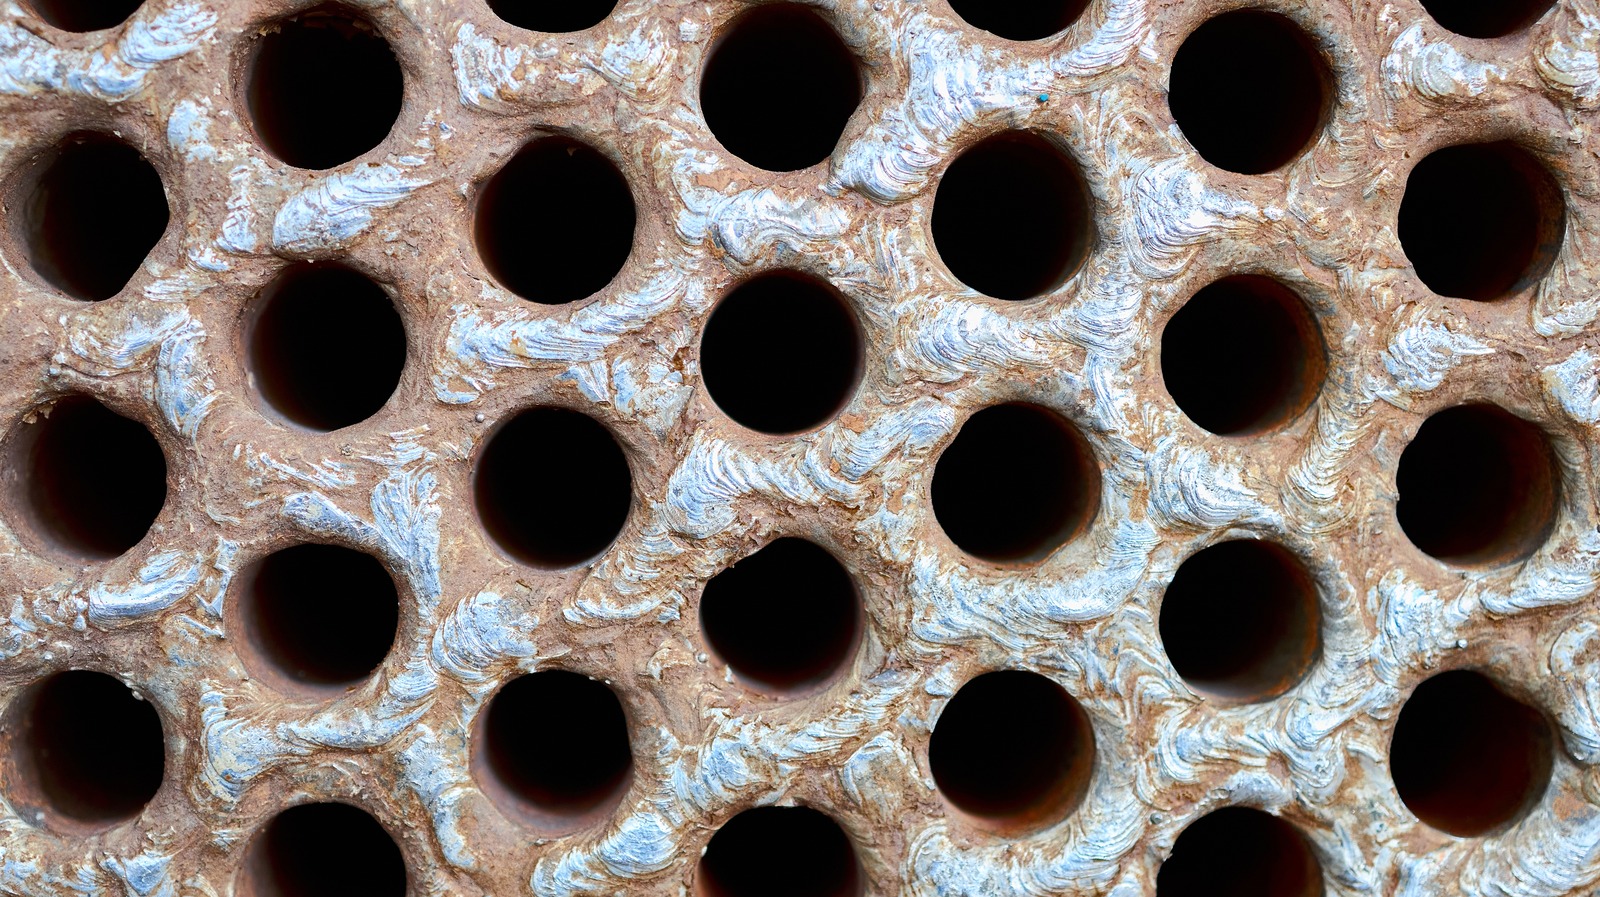 What Is Trypophobia?